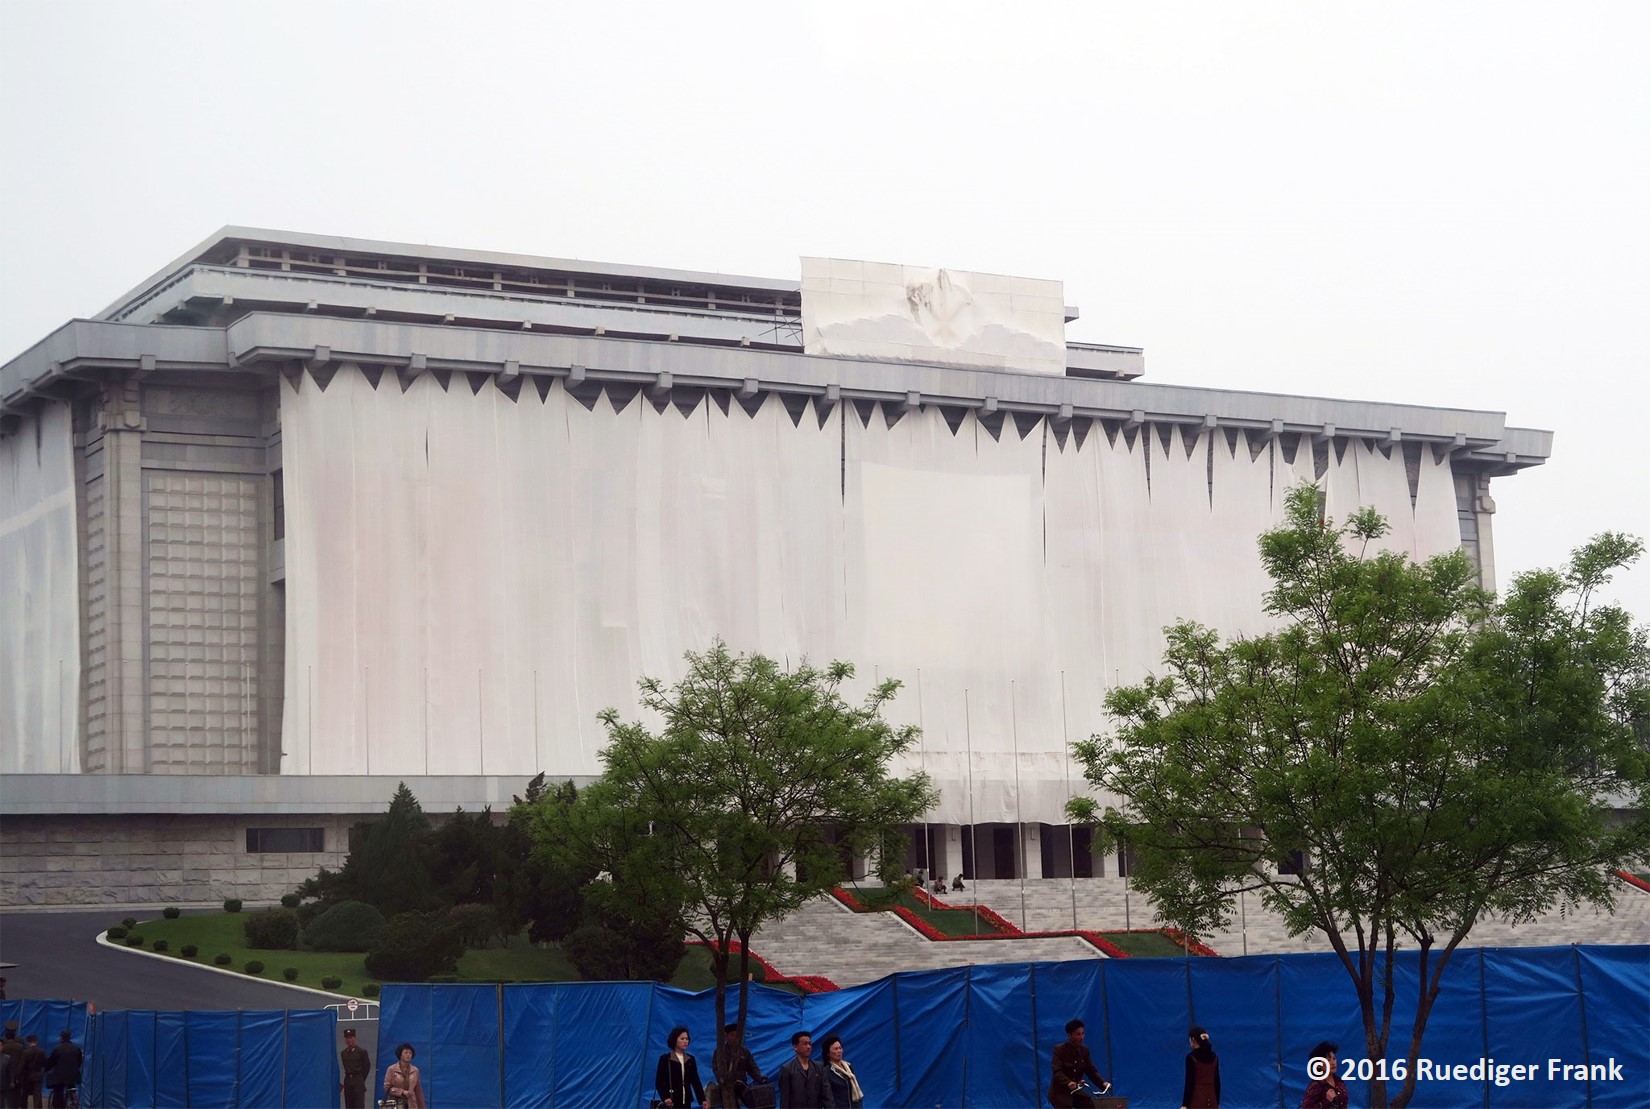 The April 25 House of Culture getting readied to serve as the venue for the 7th Party Congress. (Photo: Ruediger Frank)